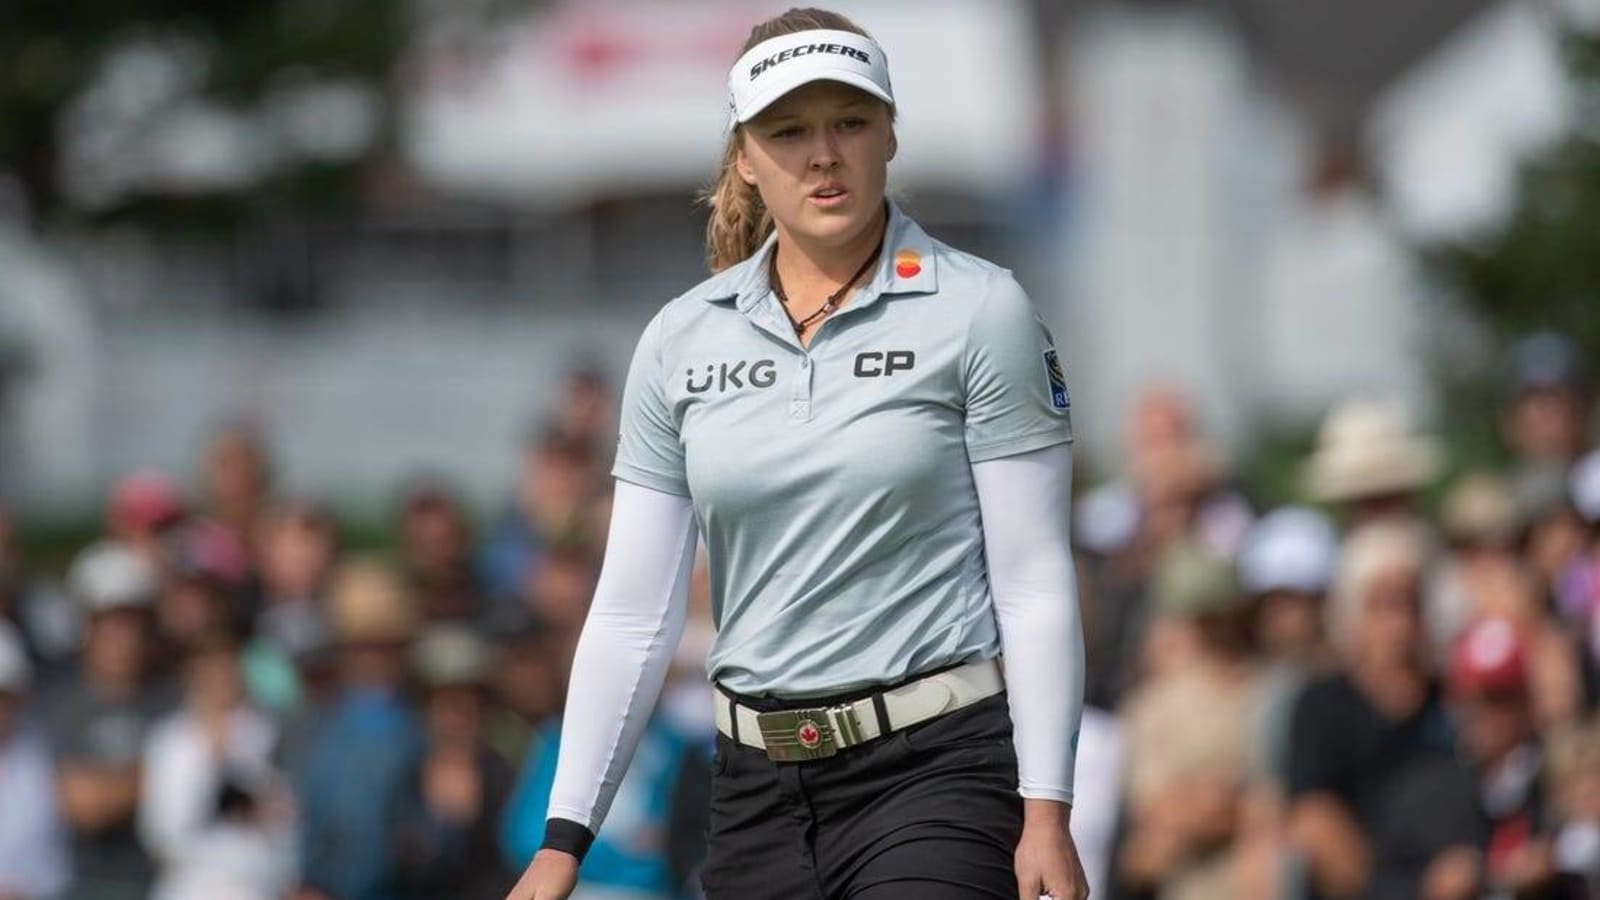 Brooke Henderson leads by 4 shots at midway point at Lake Nona